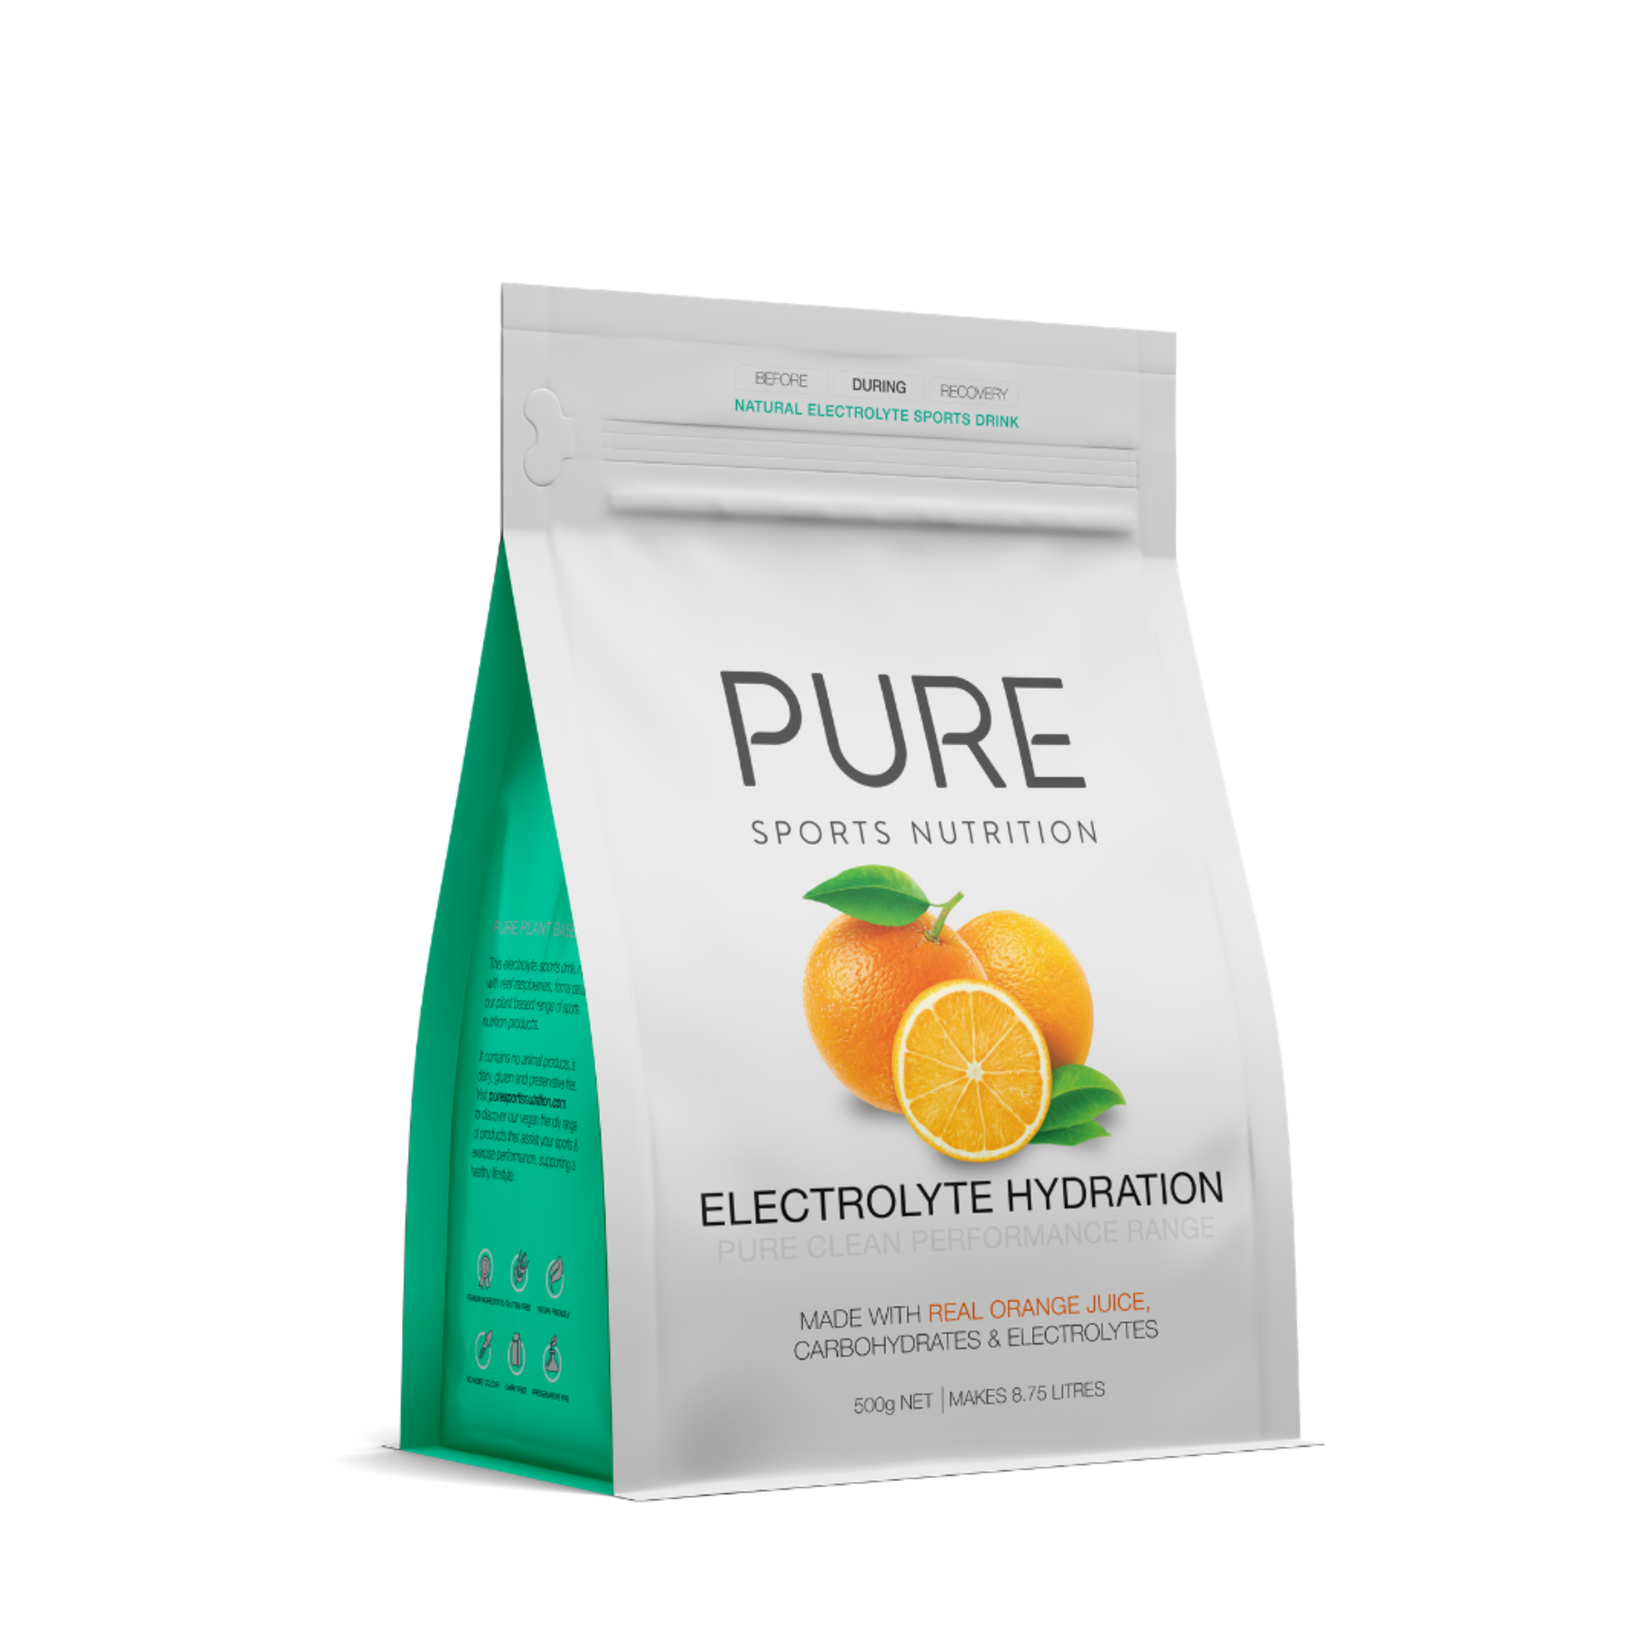 PURE SPORTS NUTRITION PURE Electrolyte Hydration 500g